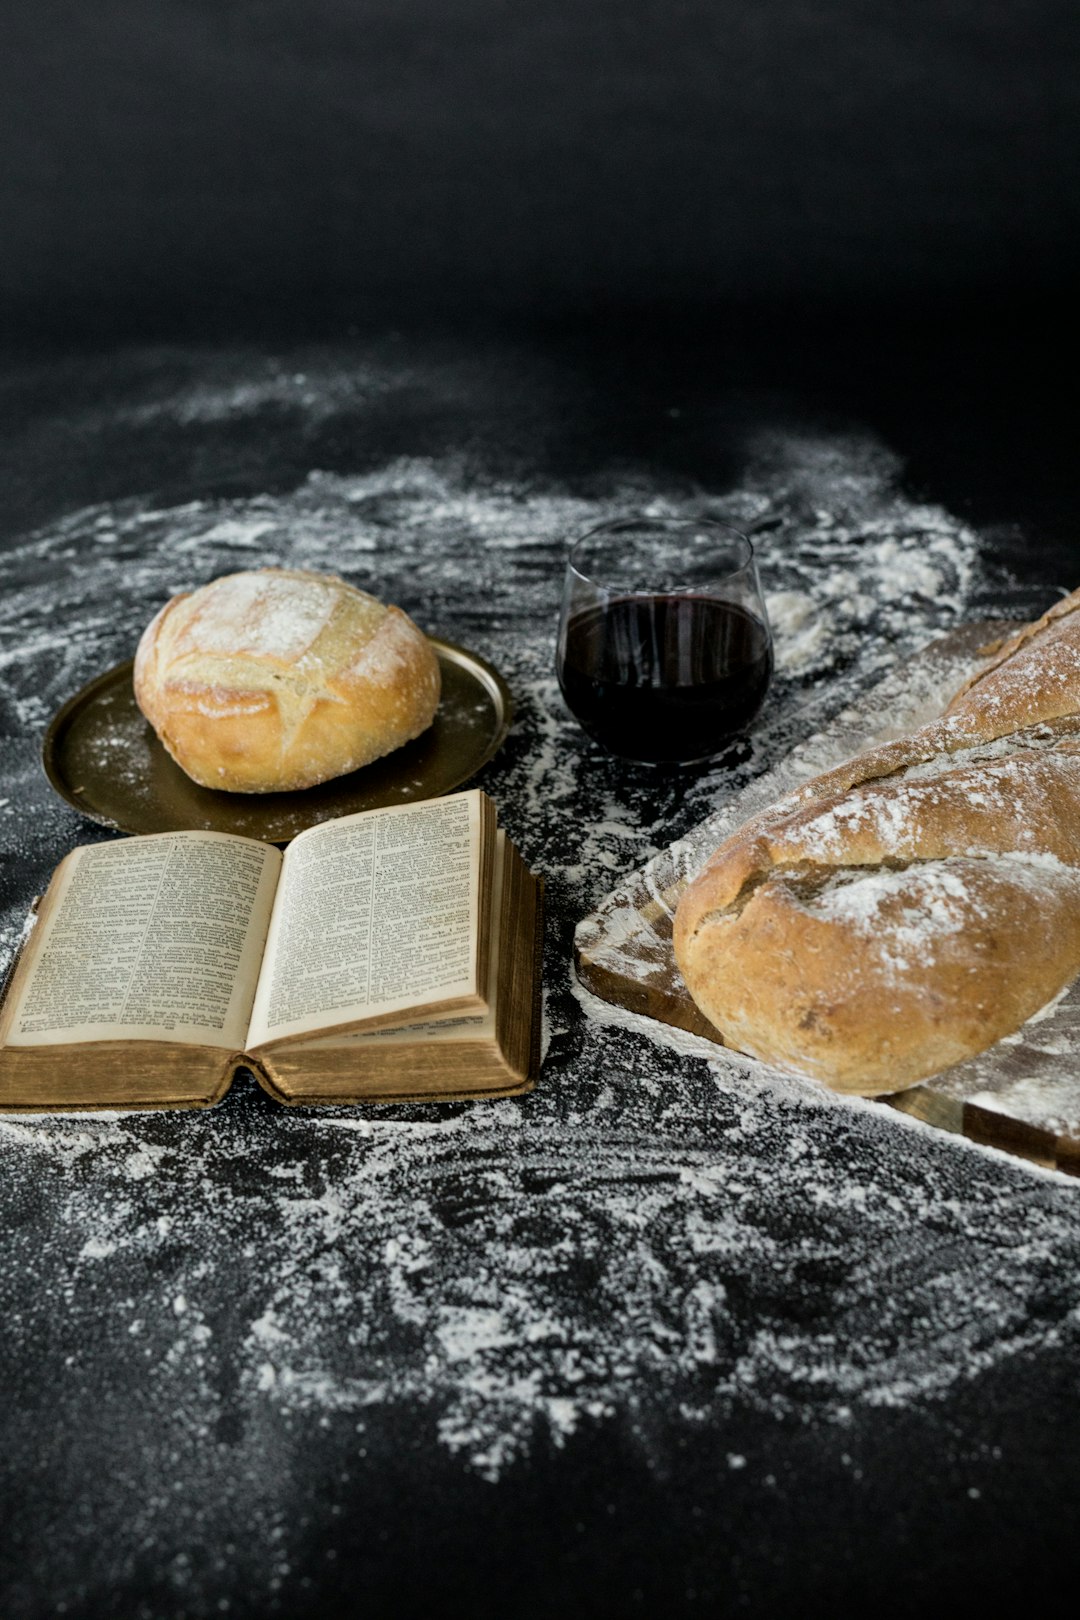 bread beside book page